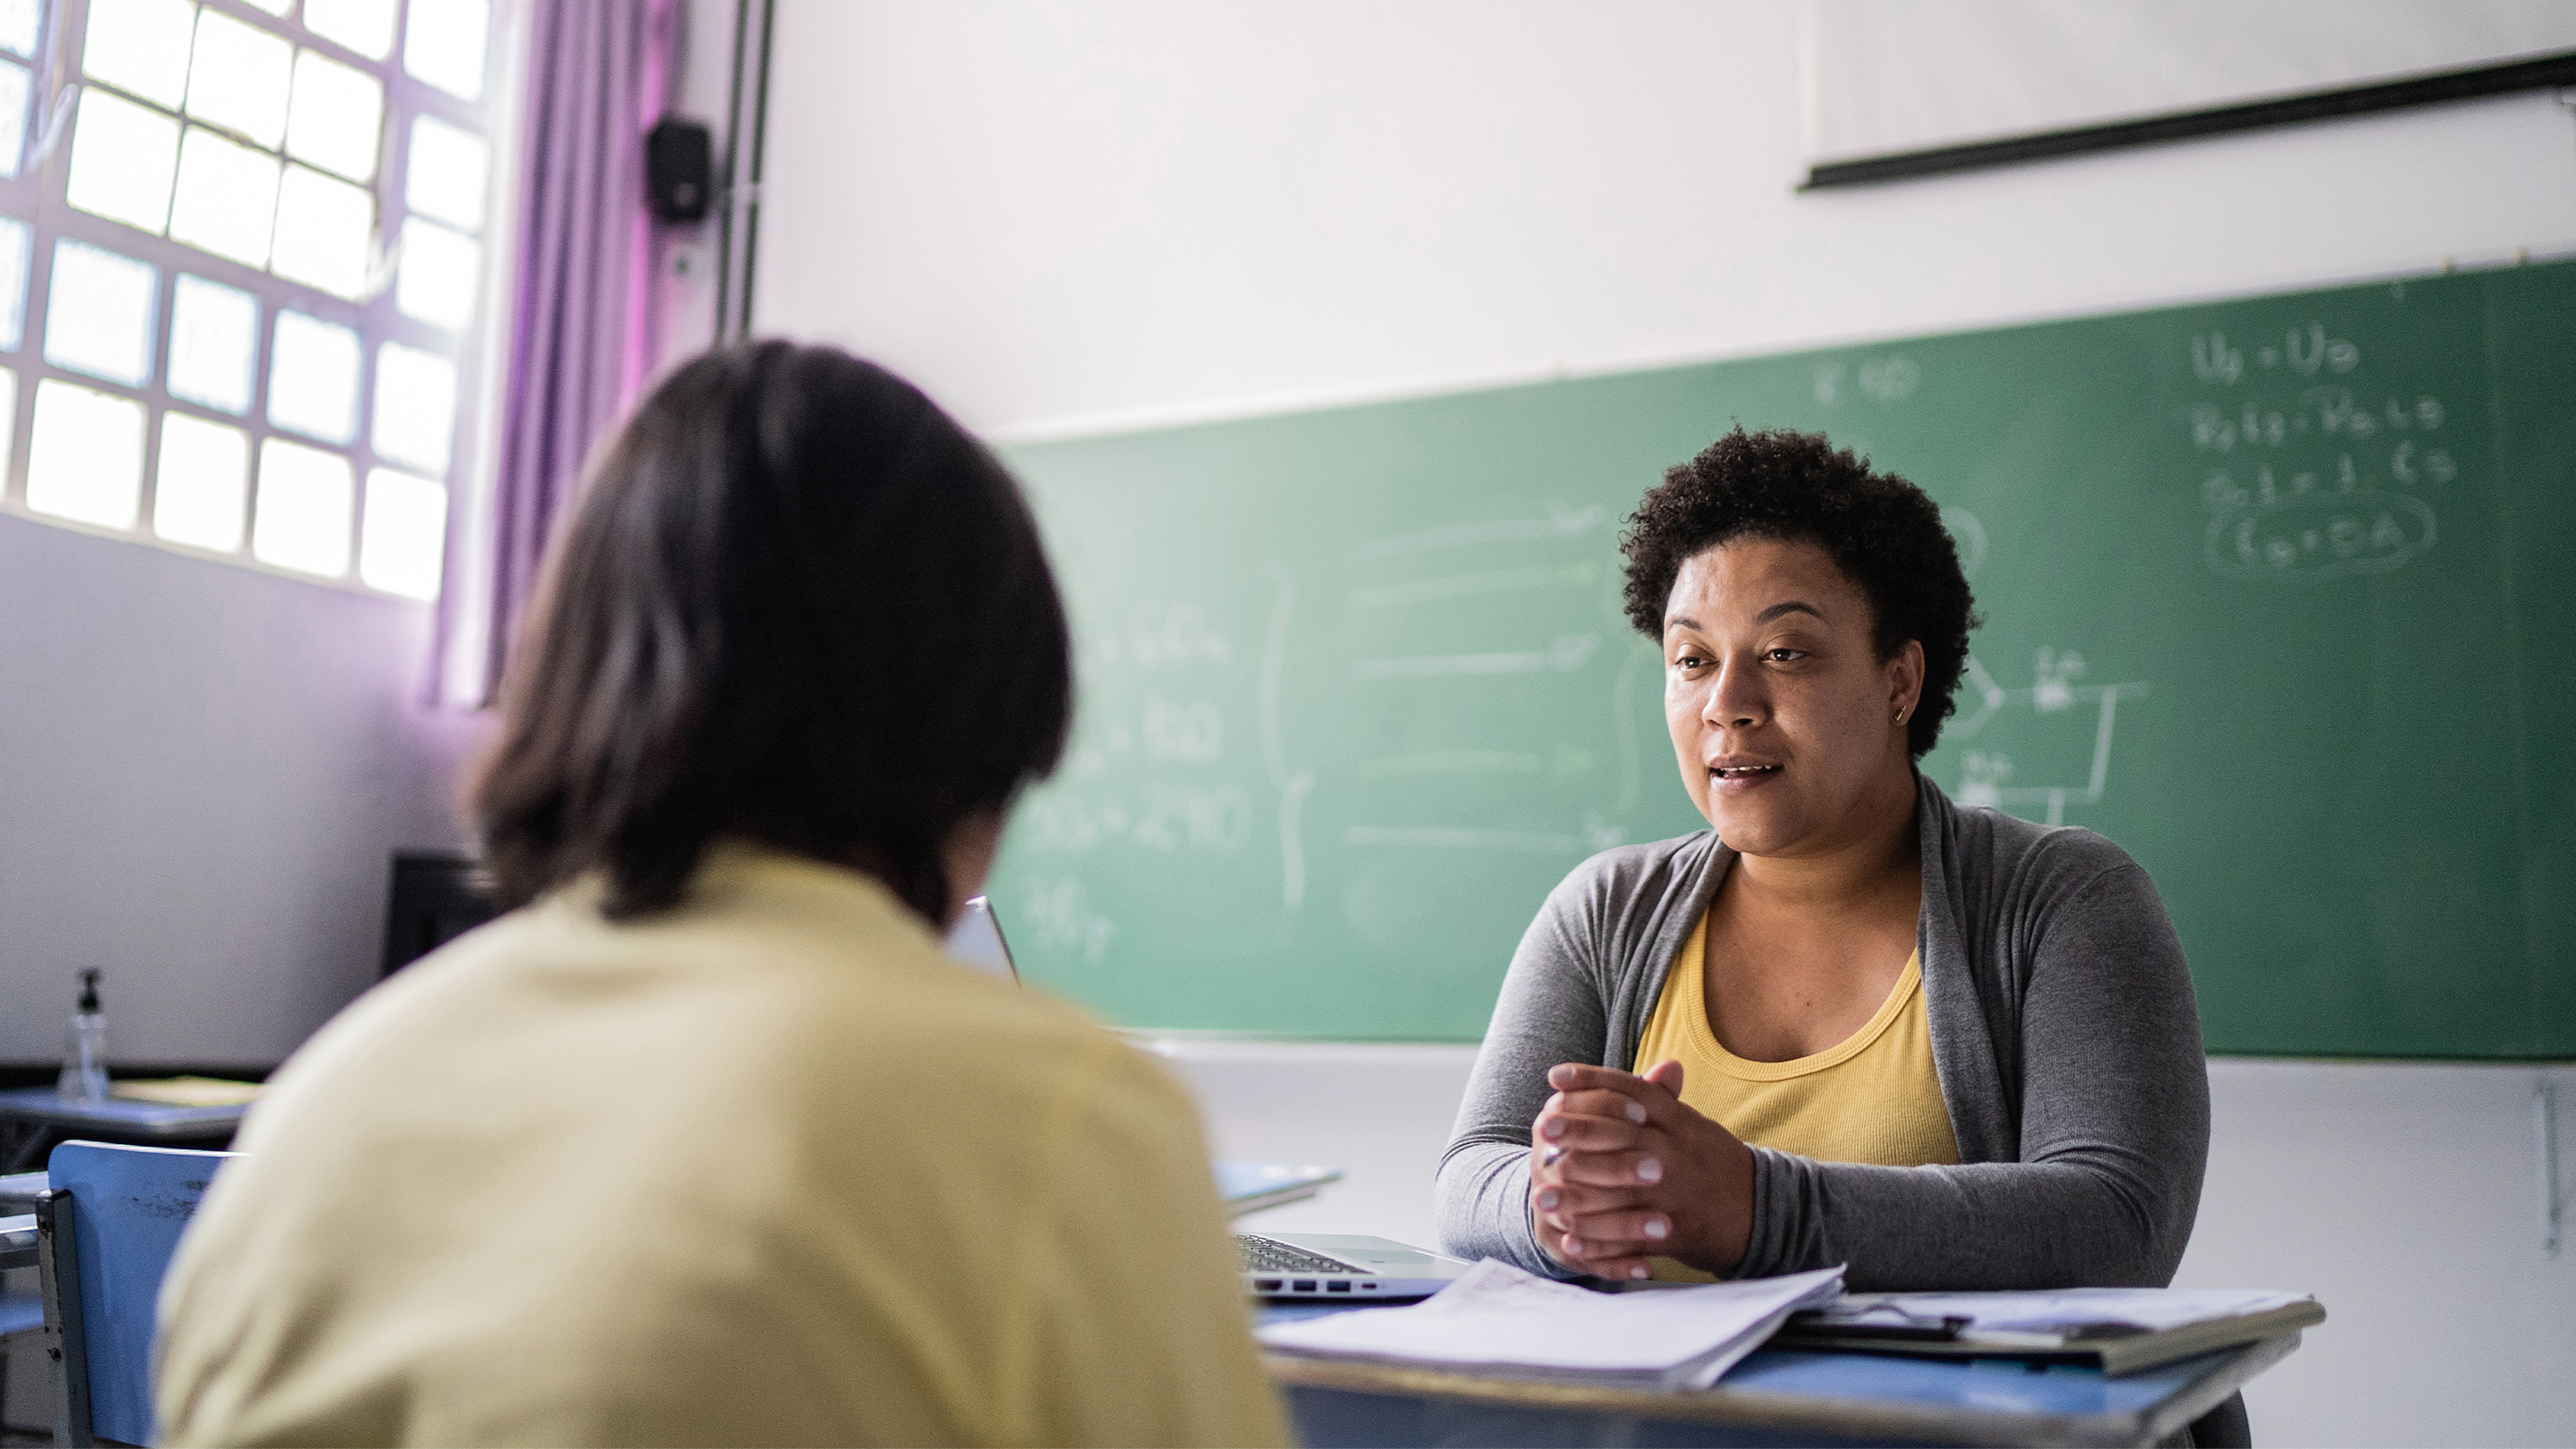 4 Steps to Discussing Challenging Behavior With a Student